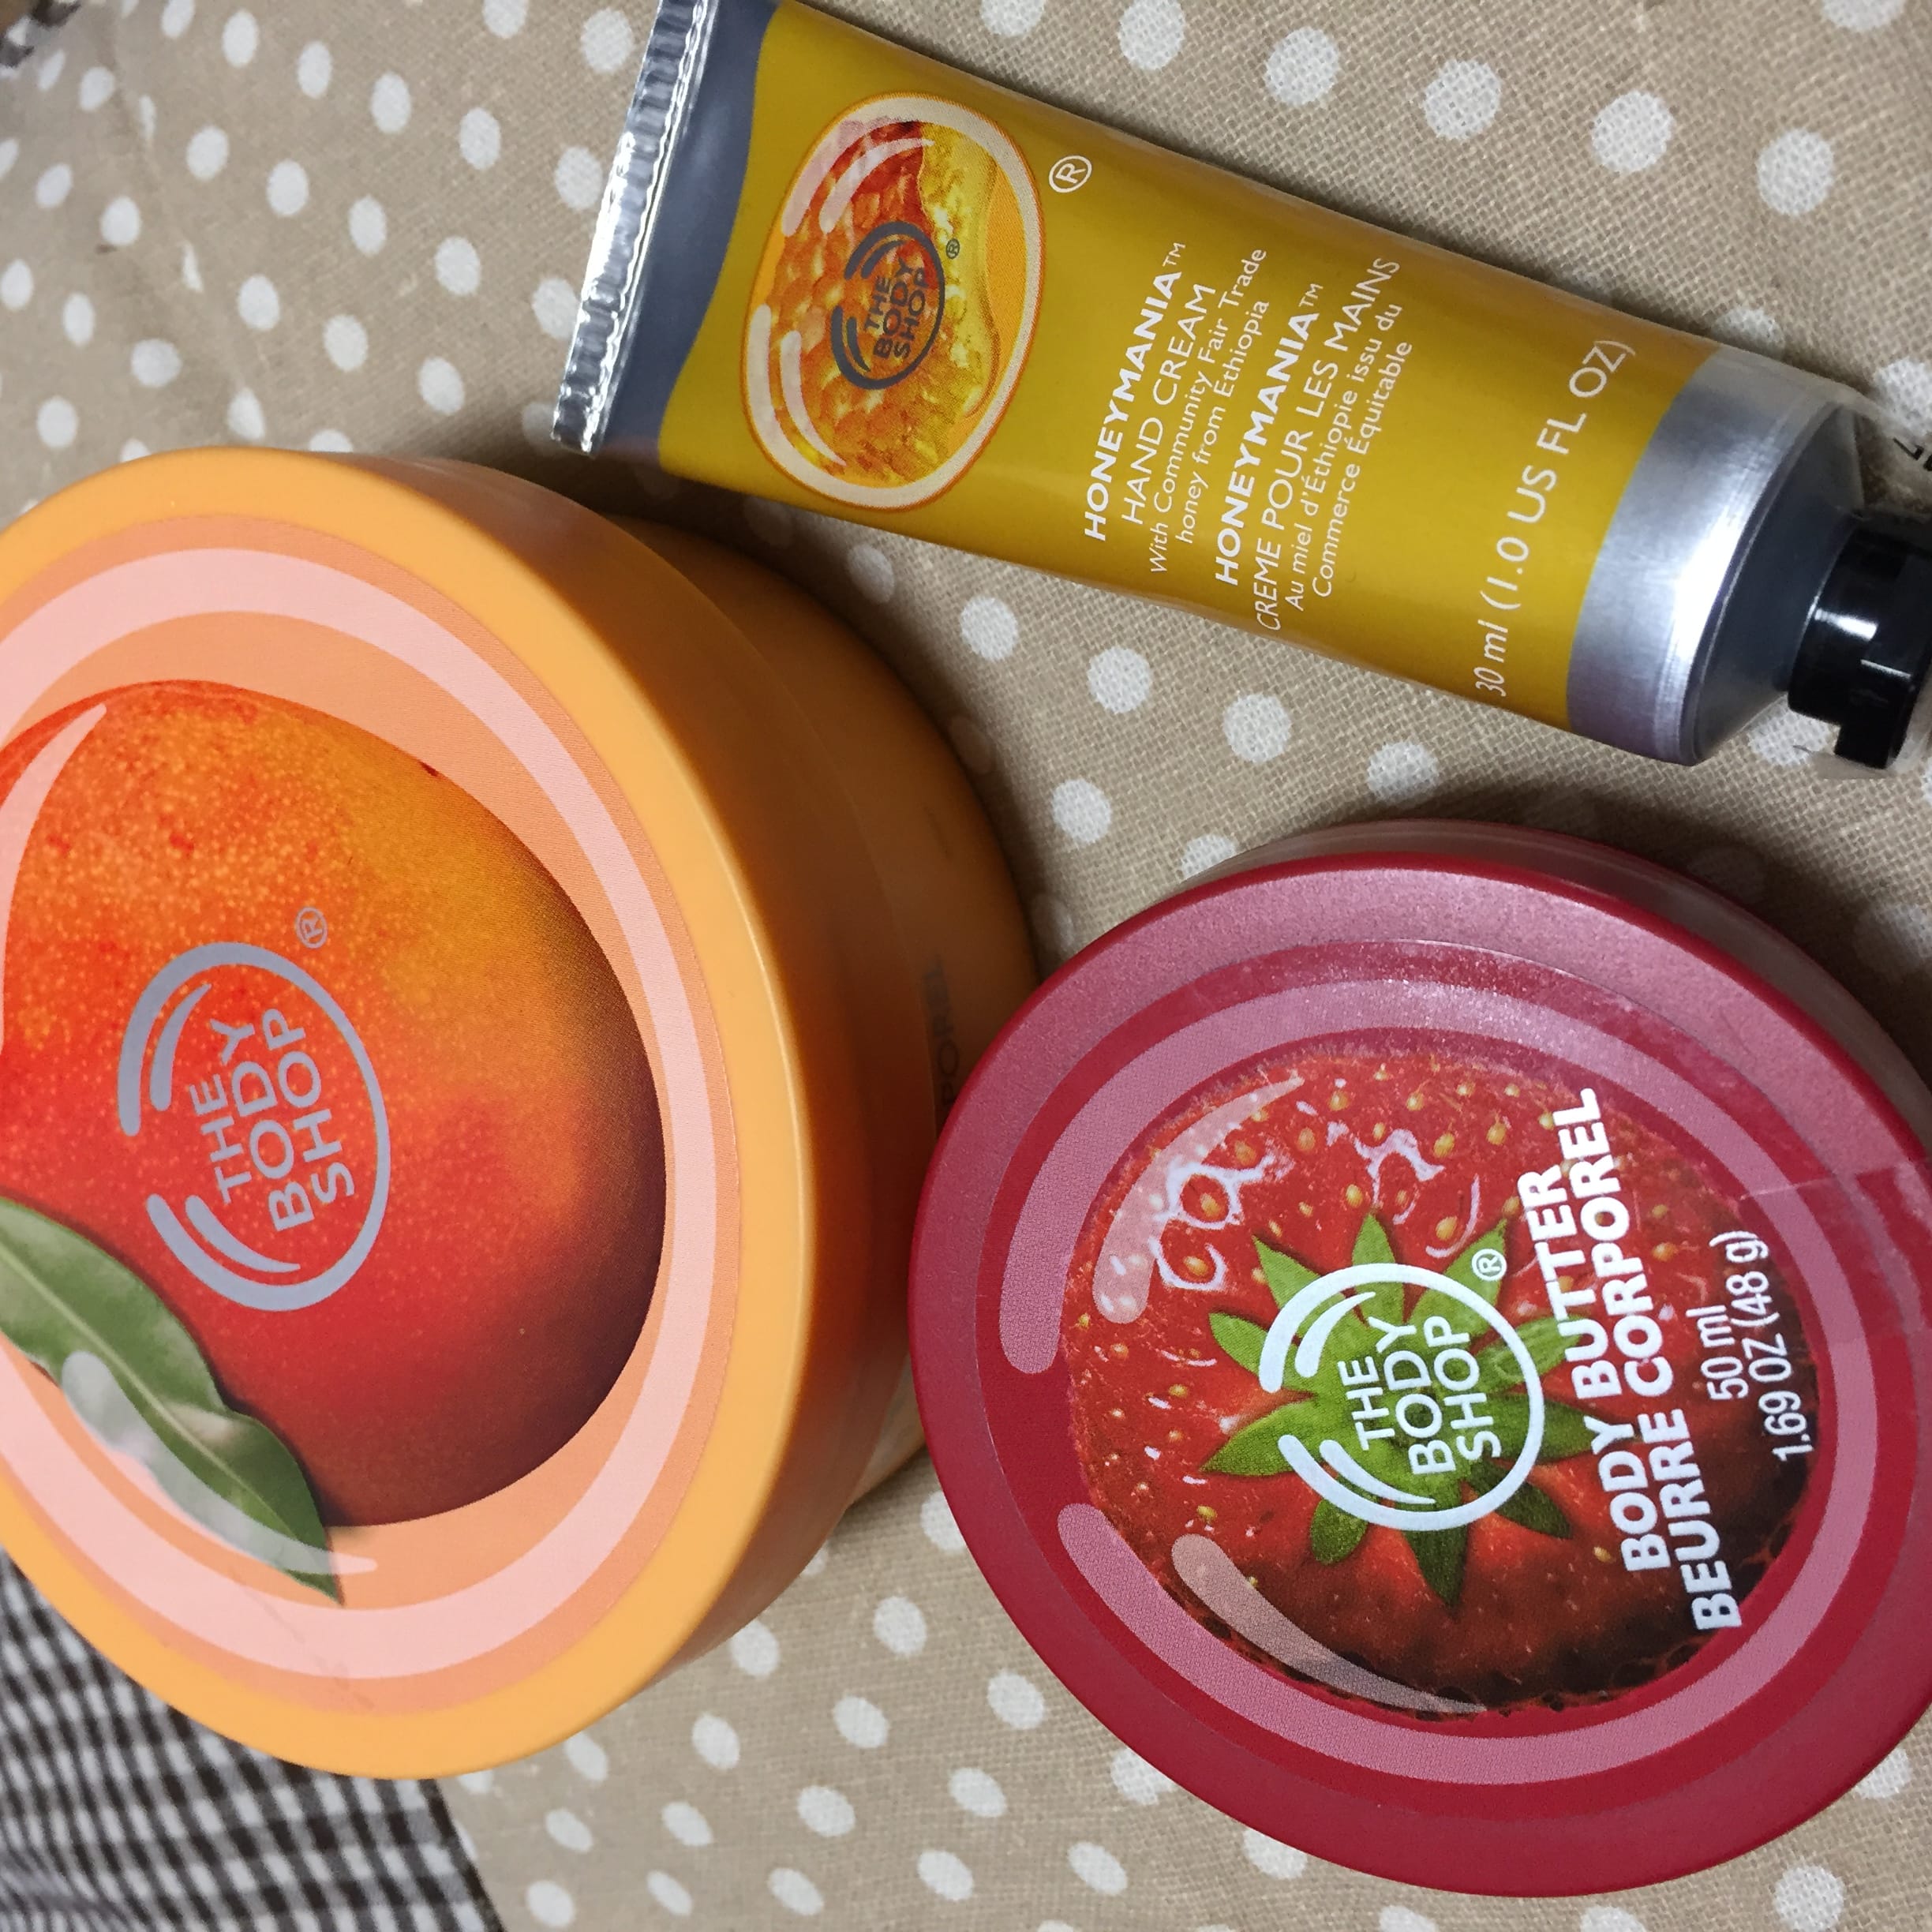 Memories with THE BODY SHOPпЅњTHE BODY SHOP (г‚¶гѓњгѓ‡г‚Јг‚·гѓ§гѓѓгѓ—)